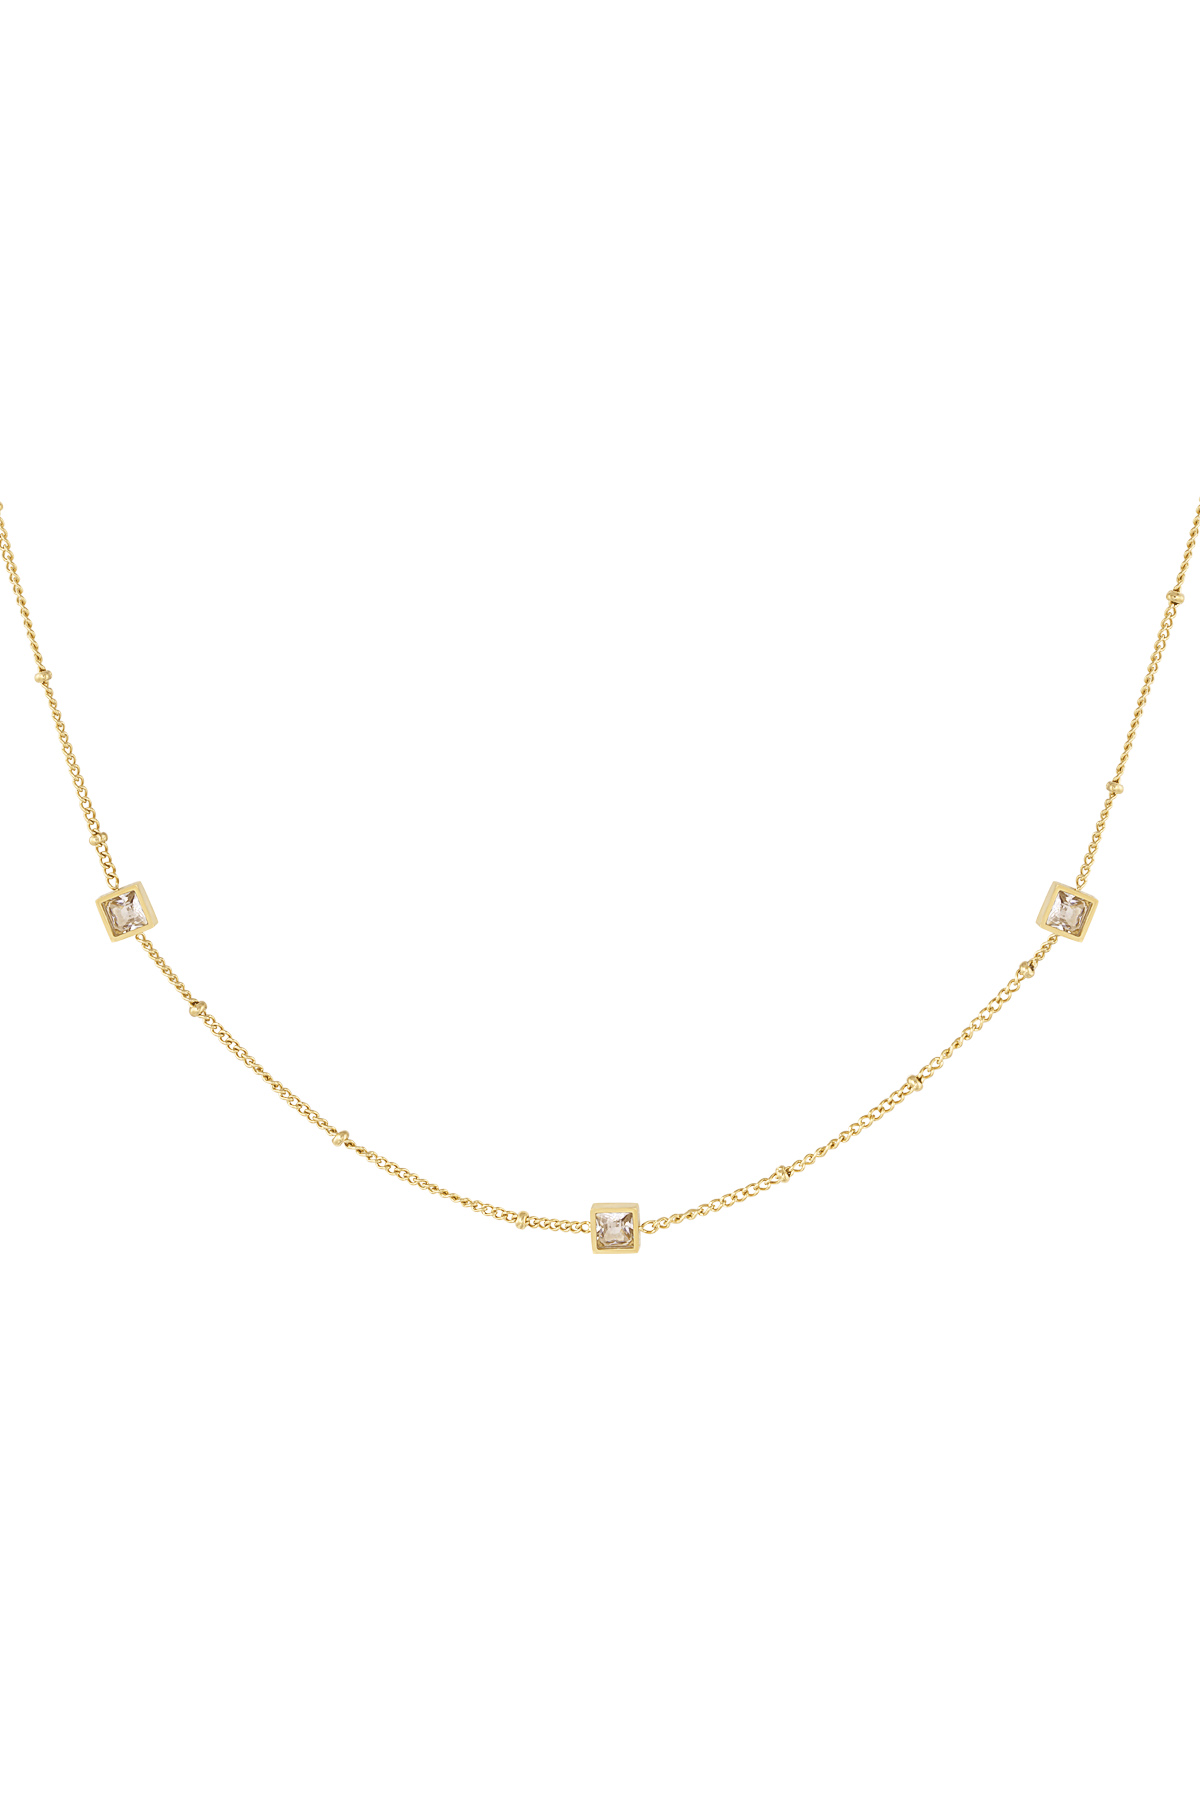 Necklace square stones - gold